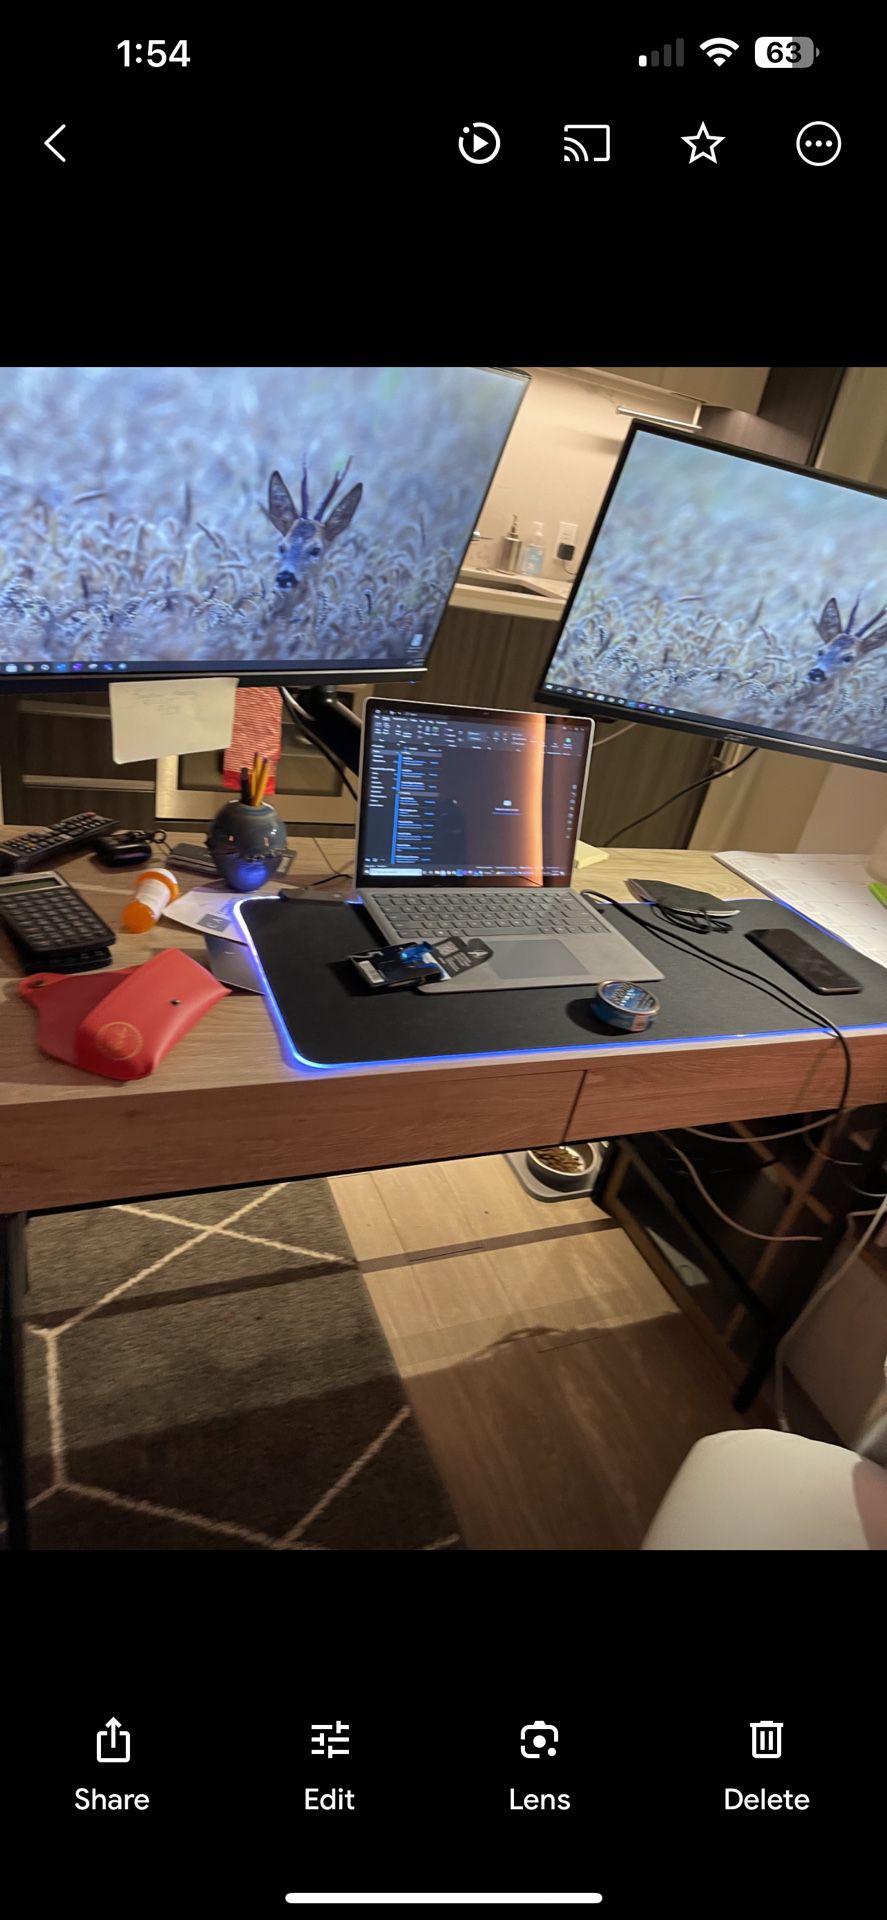 Home Office Clearance Sale - Monitors, Chair, and Desk - South Boston